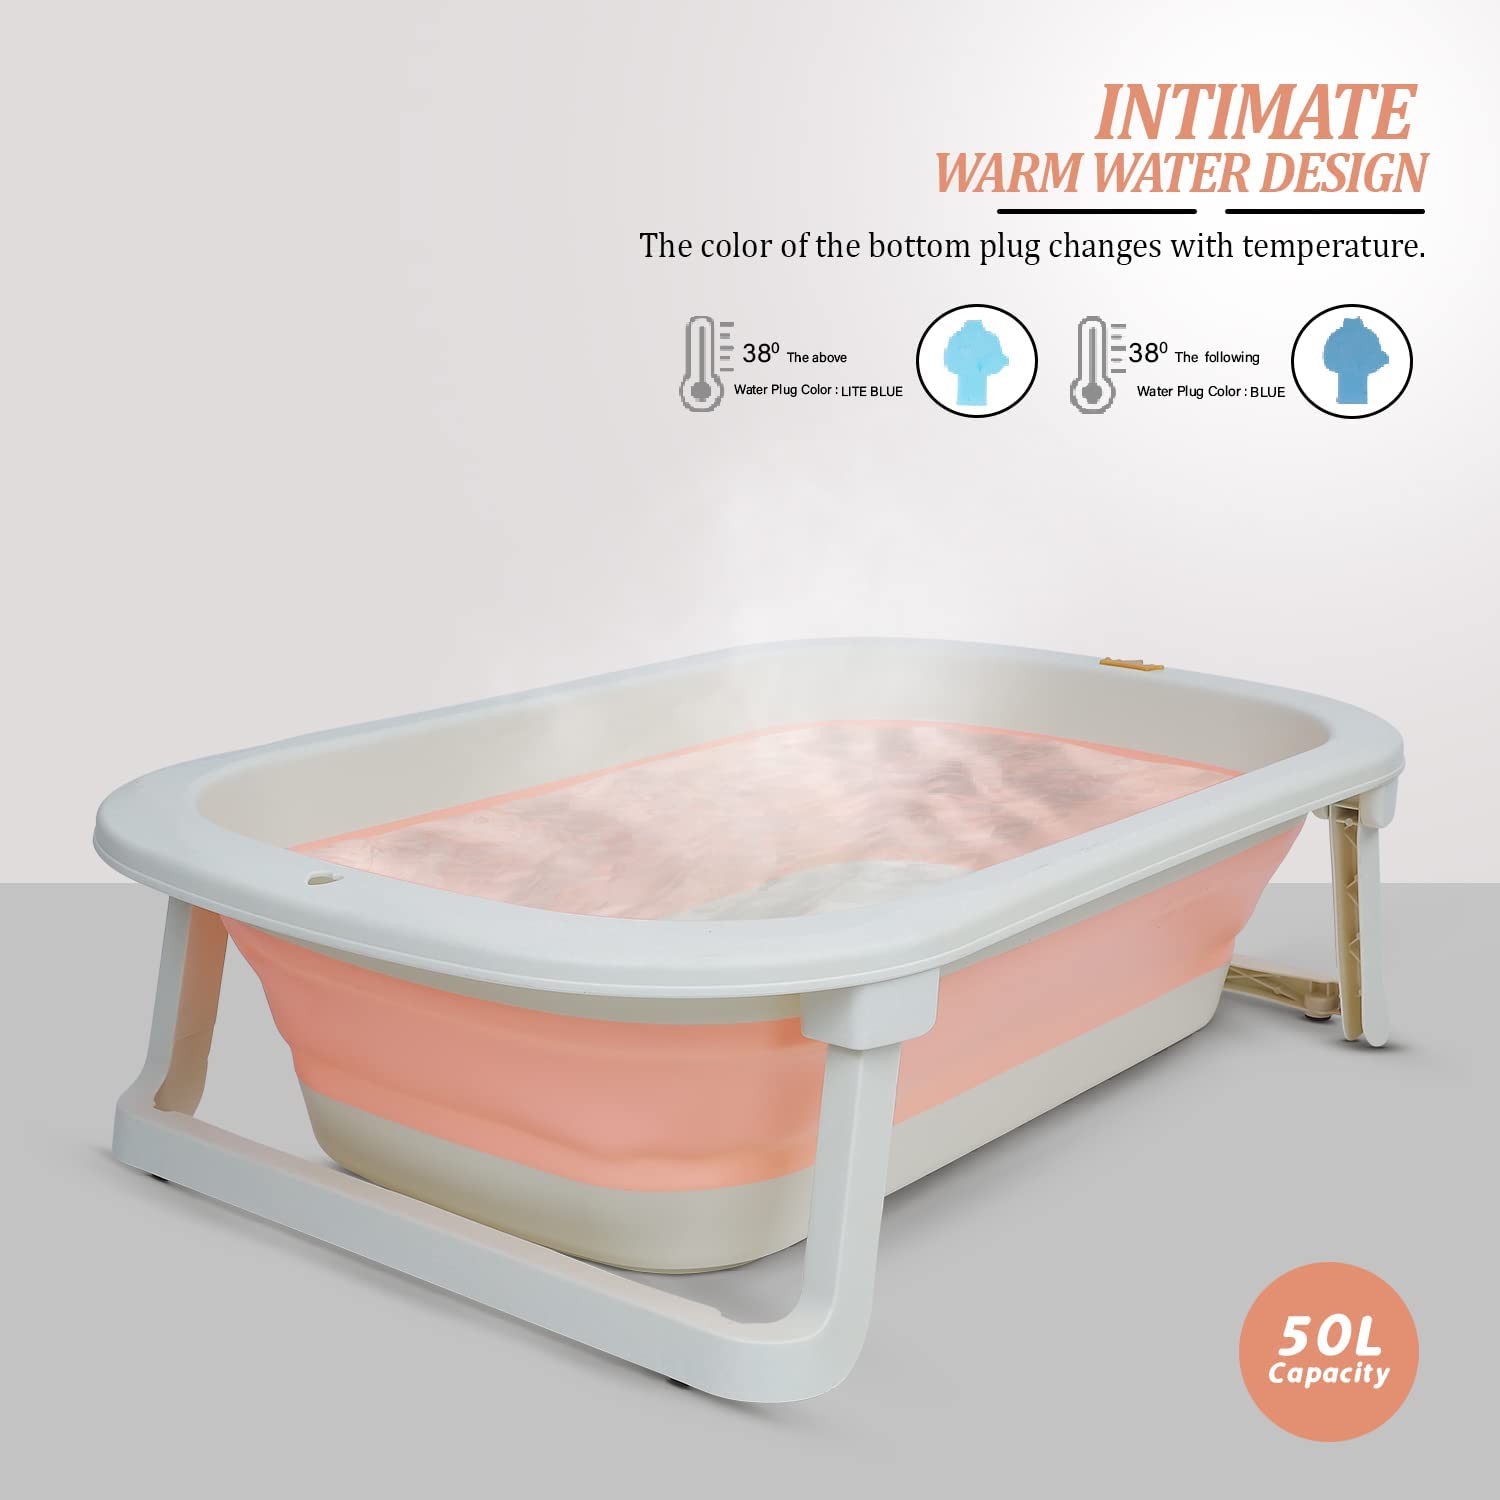 Aura Collapsible / Foldable Baby Bath Tub for Kids, Space Saving Design, Non-Slip Portable Jacuzzi Bathtub for Baby with Stand & Drainer. NB-3 Years. (Peach)